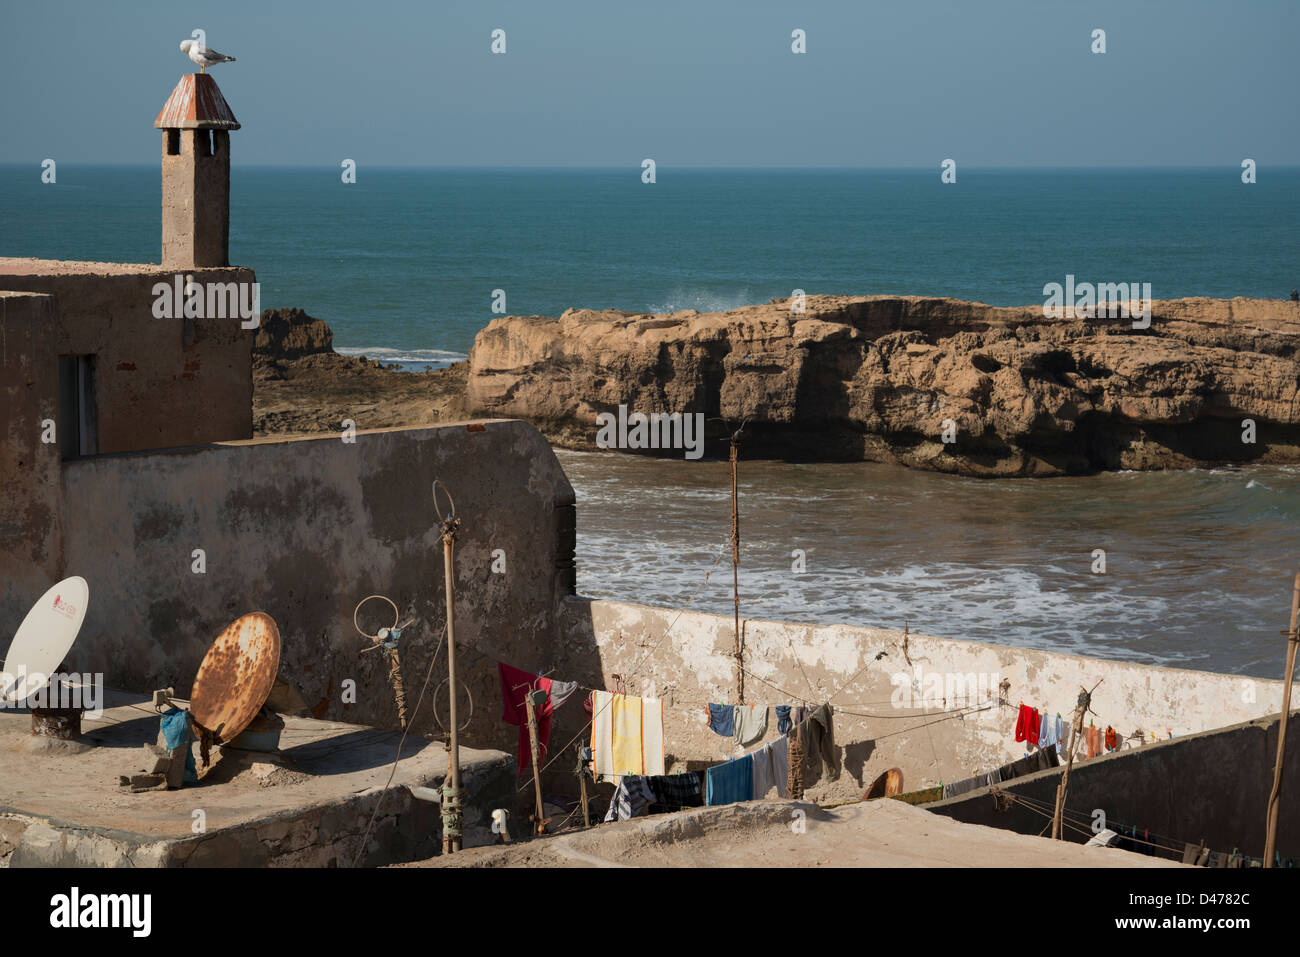 Rooftop views from the Medina of Essaouira, Morocco Stock Photo